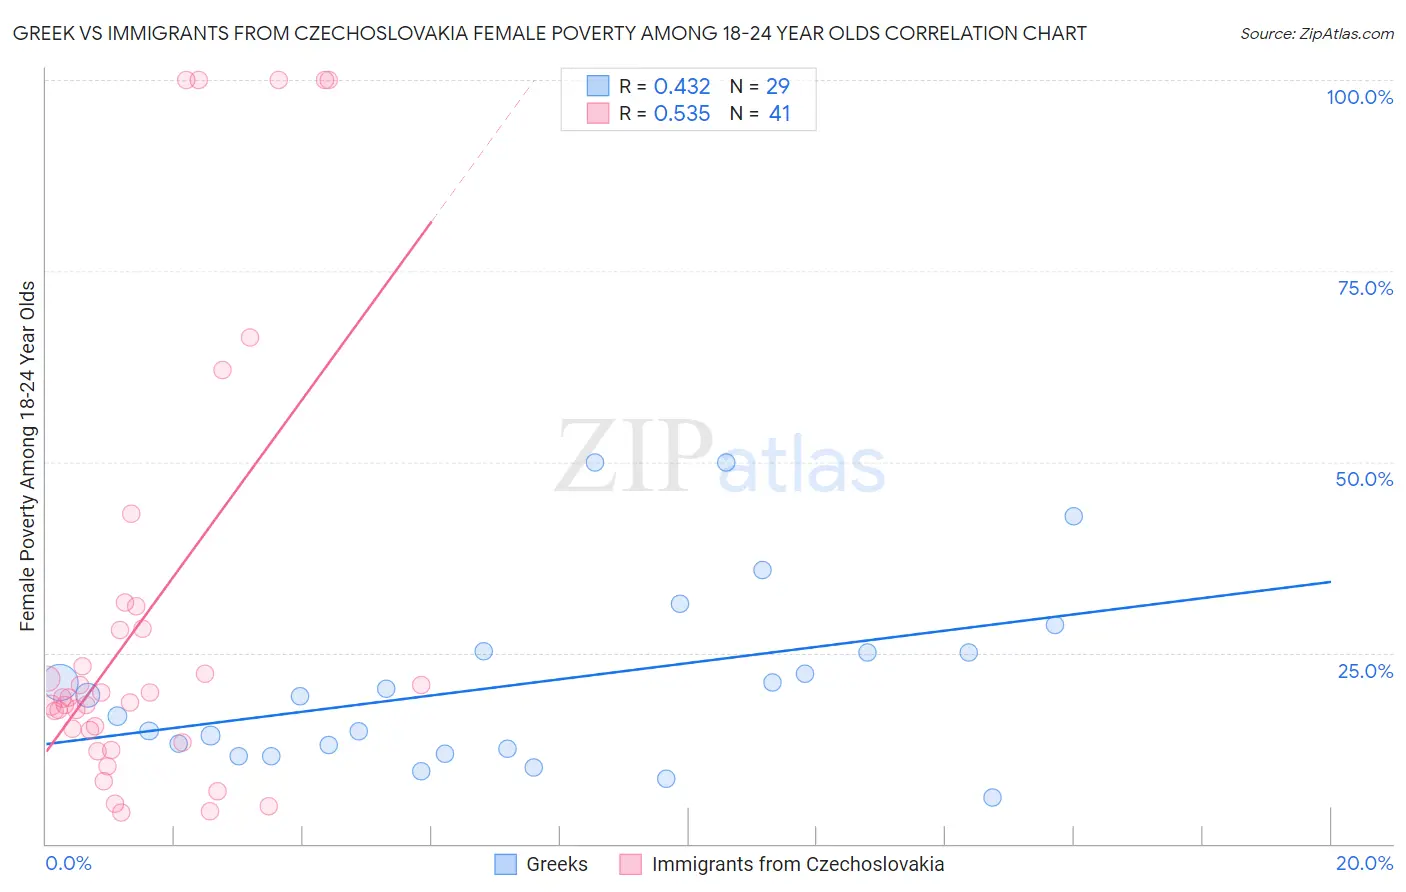 Greek vs Immigrants from Czechoslovakia Female Poverty Among 18-24 Year Olds